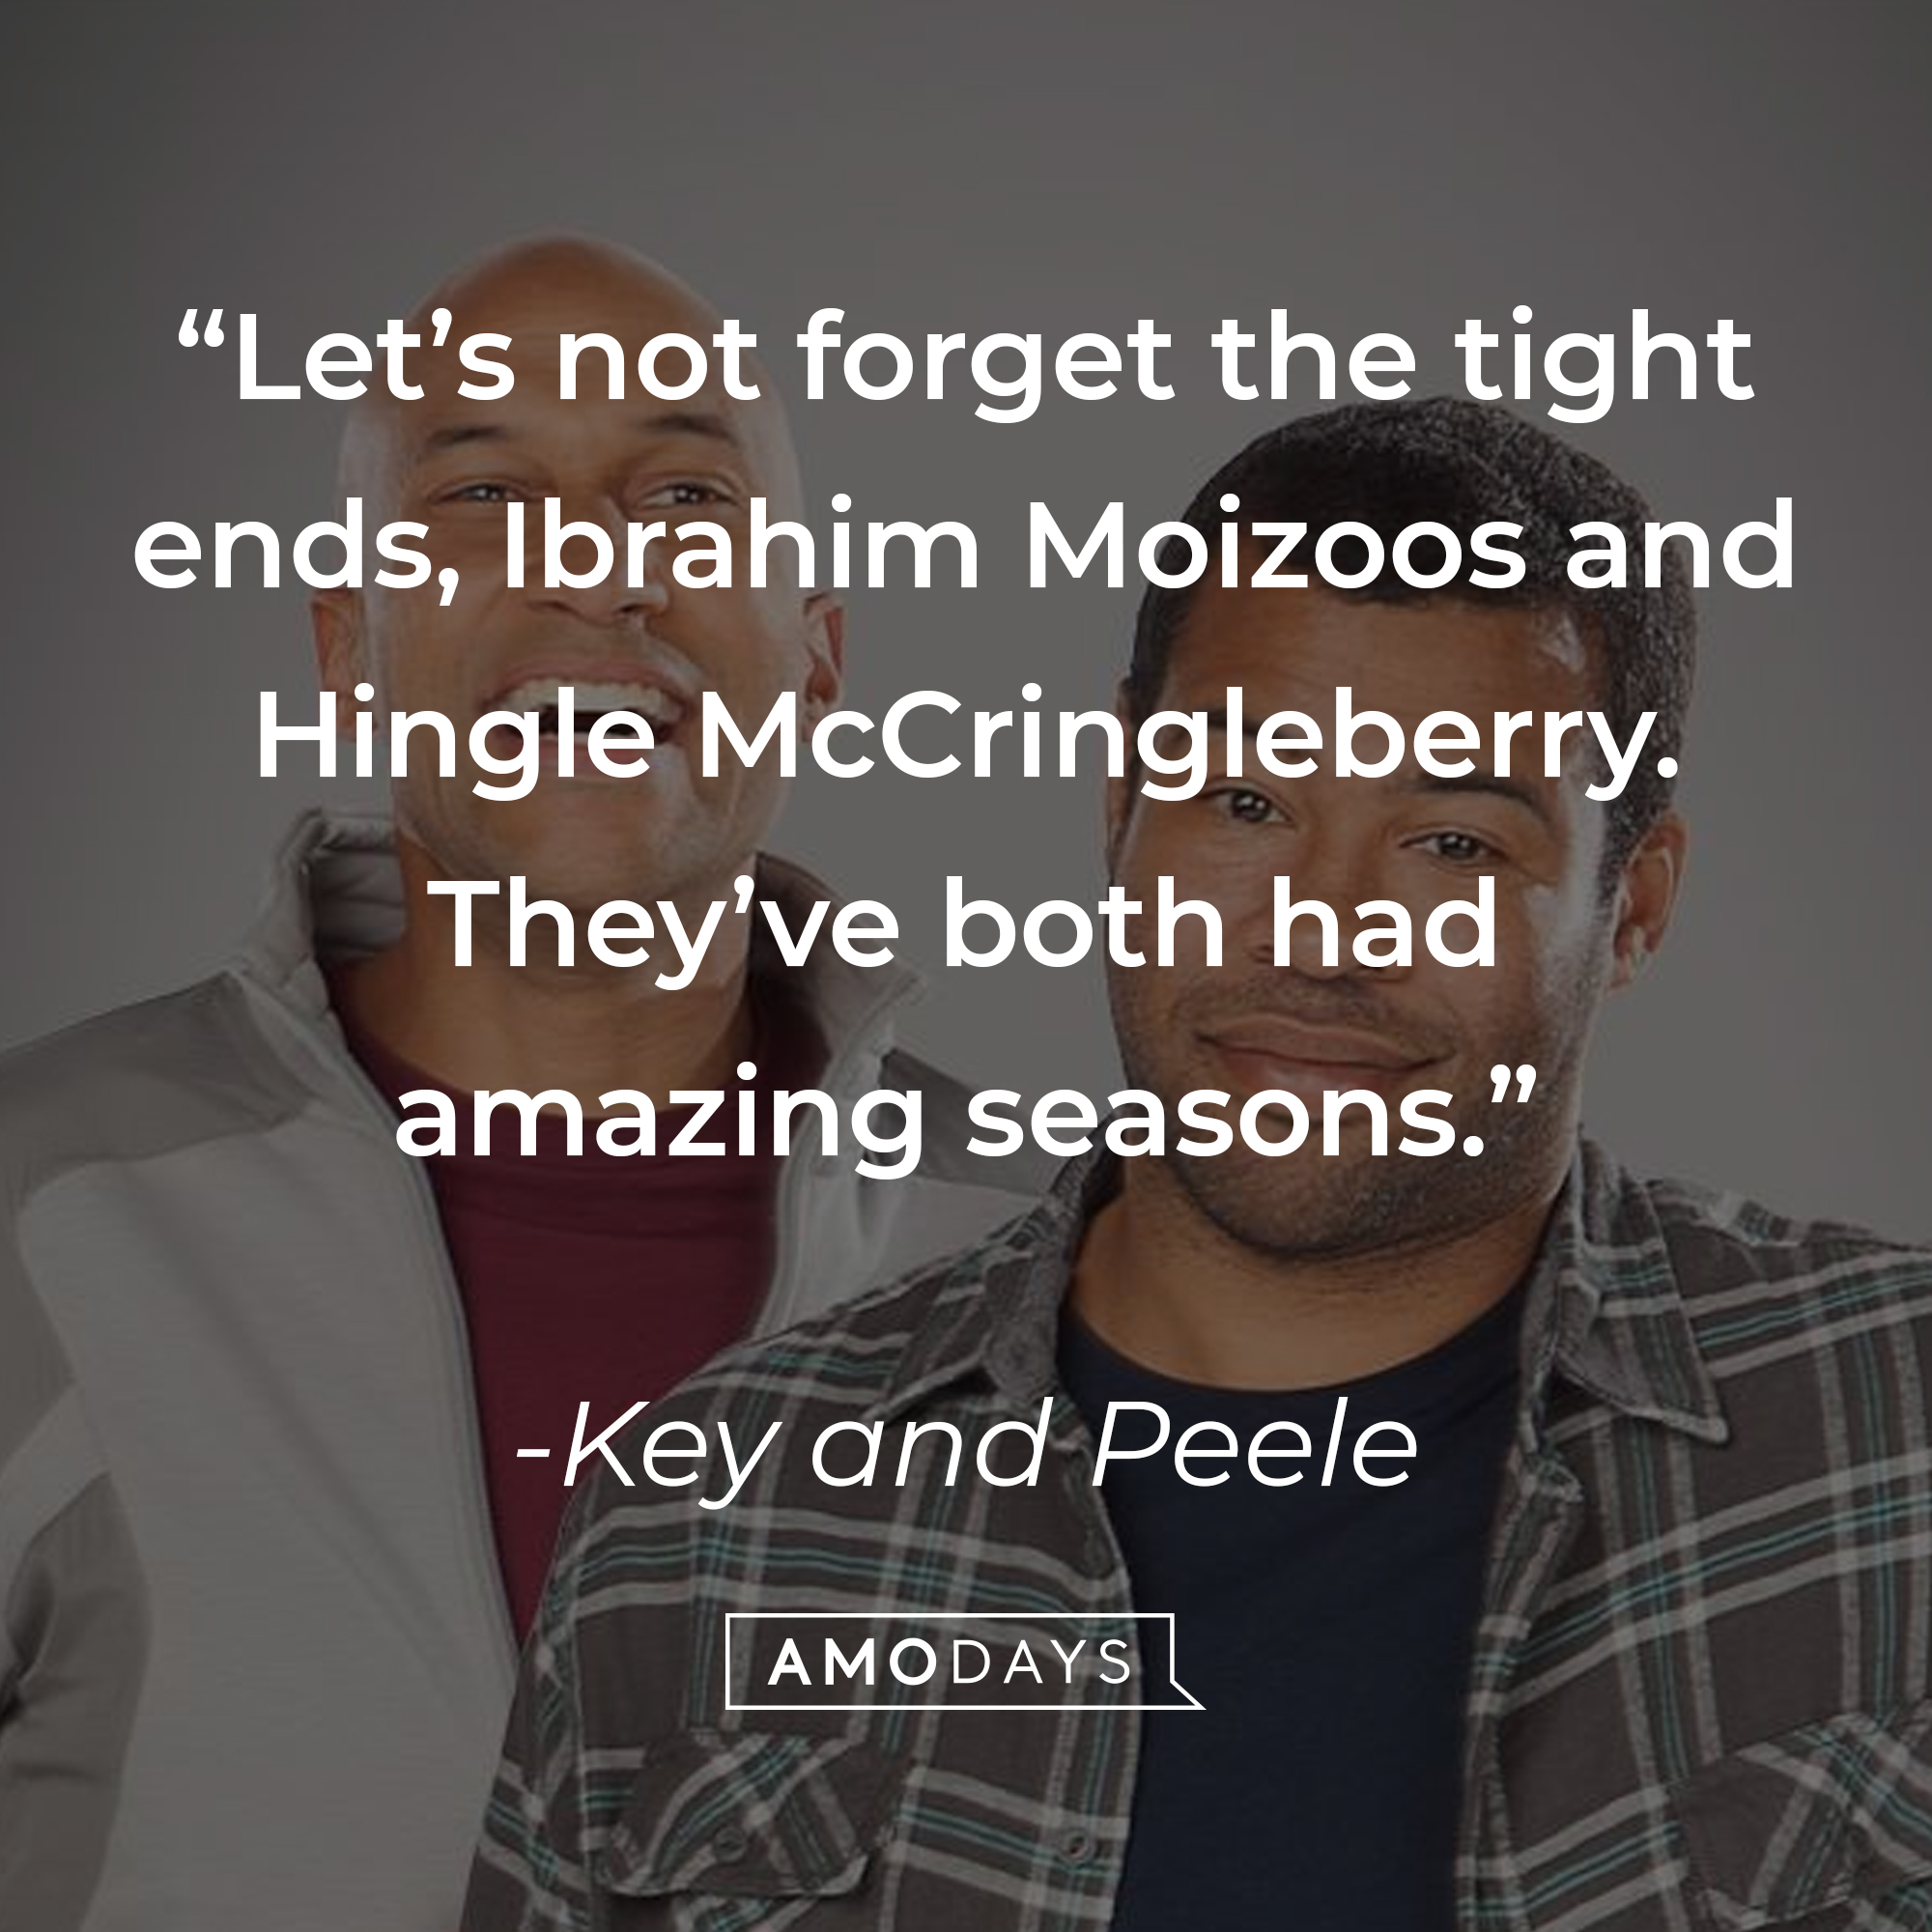 "Key and Peele's" quote: “Let’s not forget the tight ends, Ibrahim Moizoos and Hingle McCringleberry. They’ve both had amazing seasons.” | Source: facebook.com/KeyAndPeele